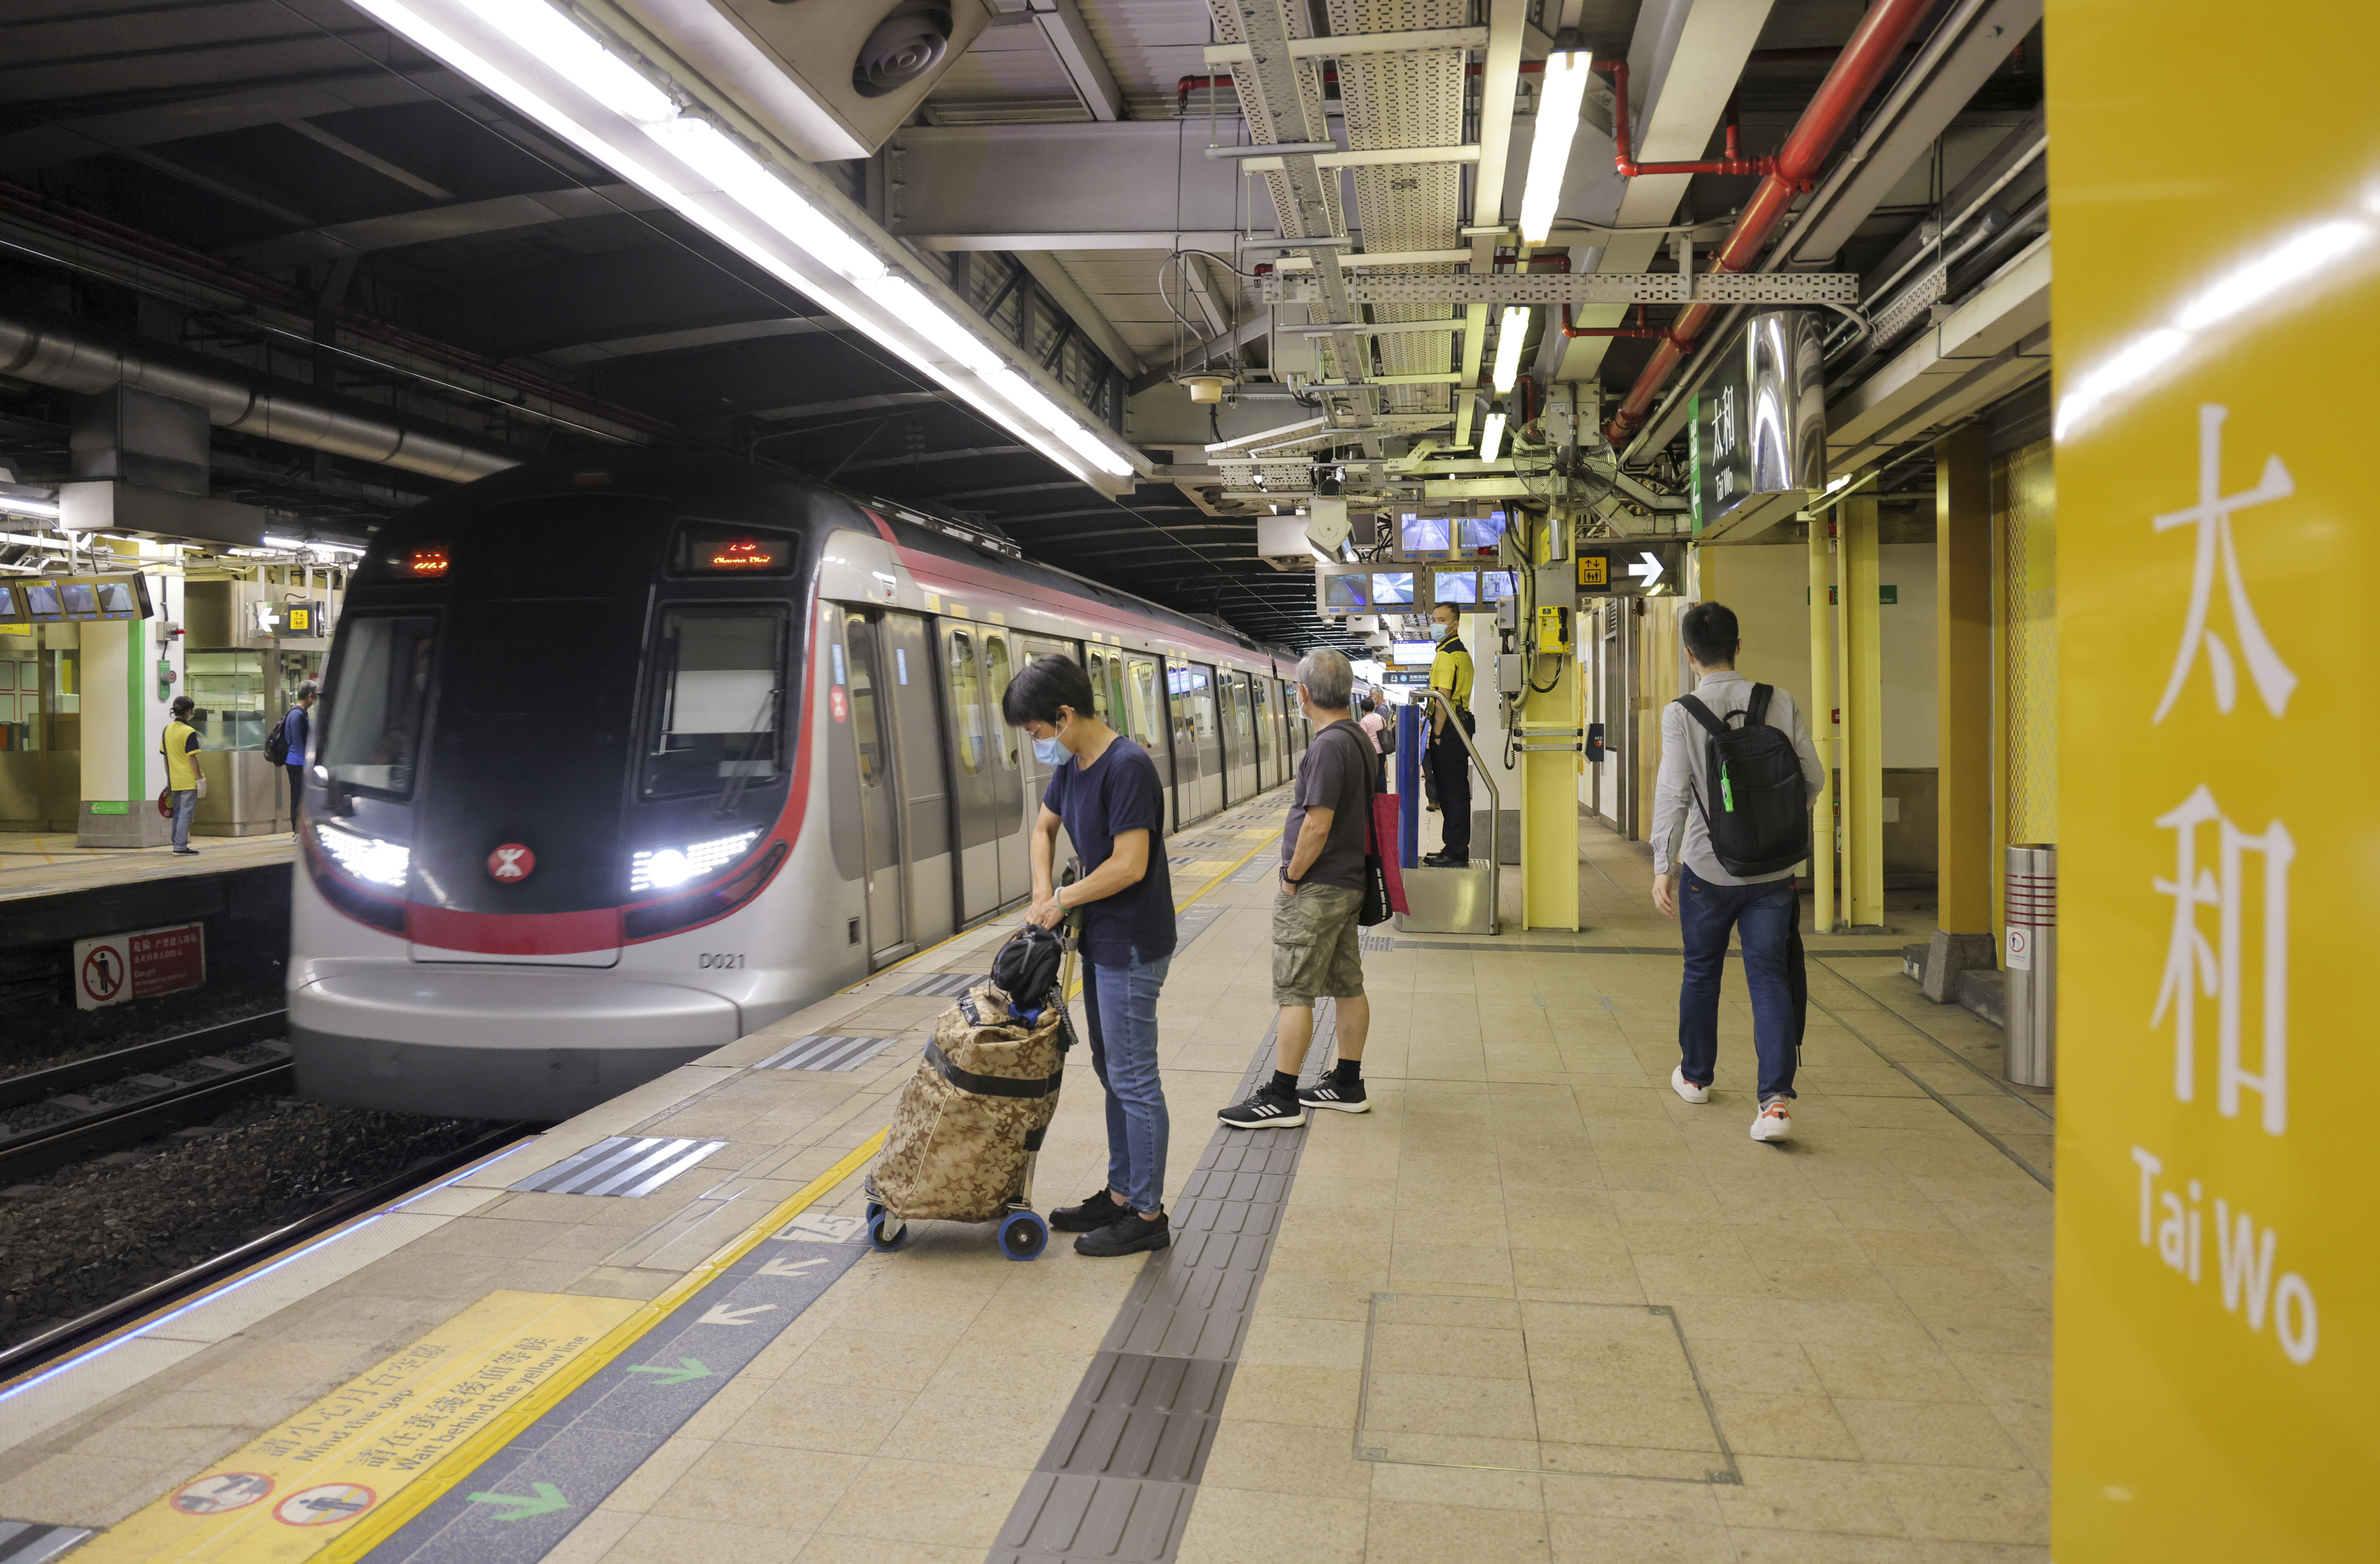 Tai Wo MTR station, part of the East Rail Line, on June 7. Photo: Jelly Tse